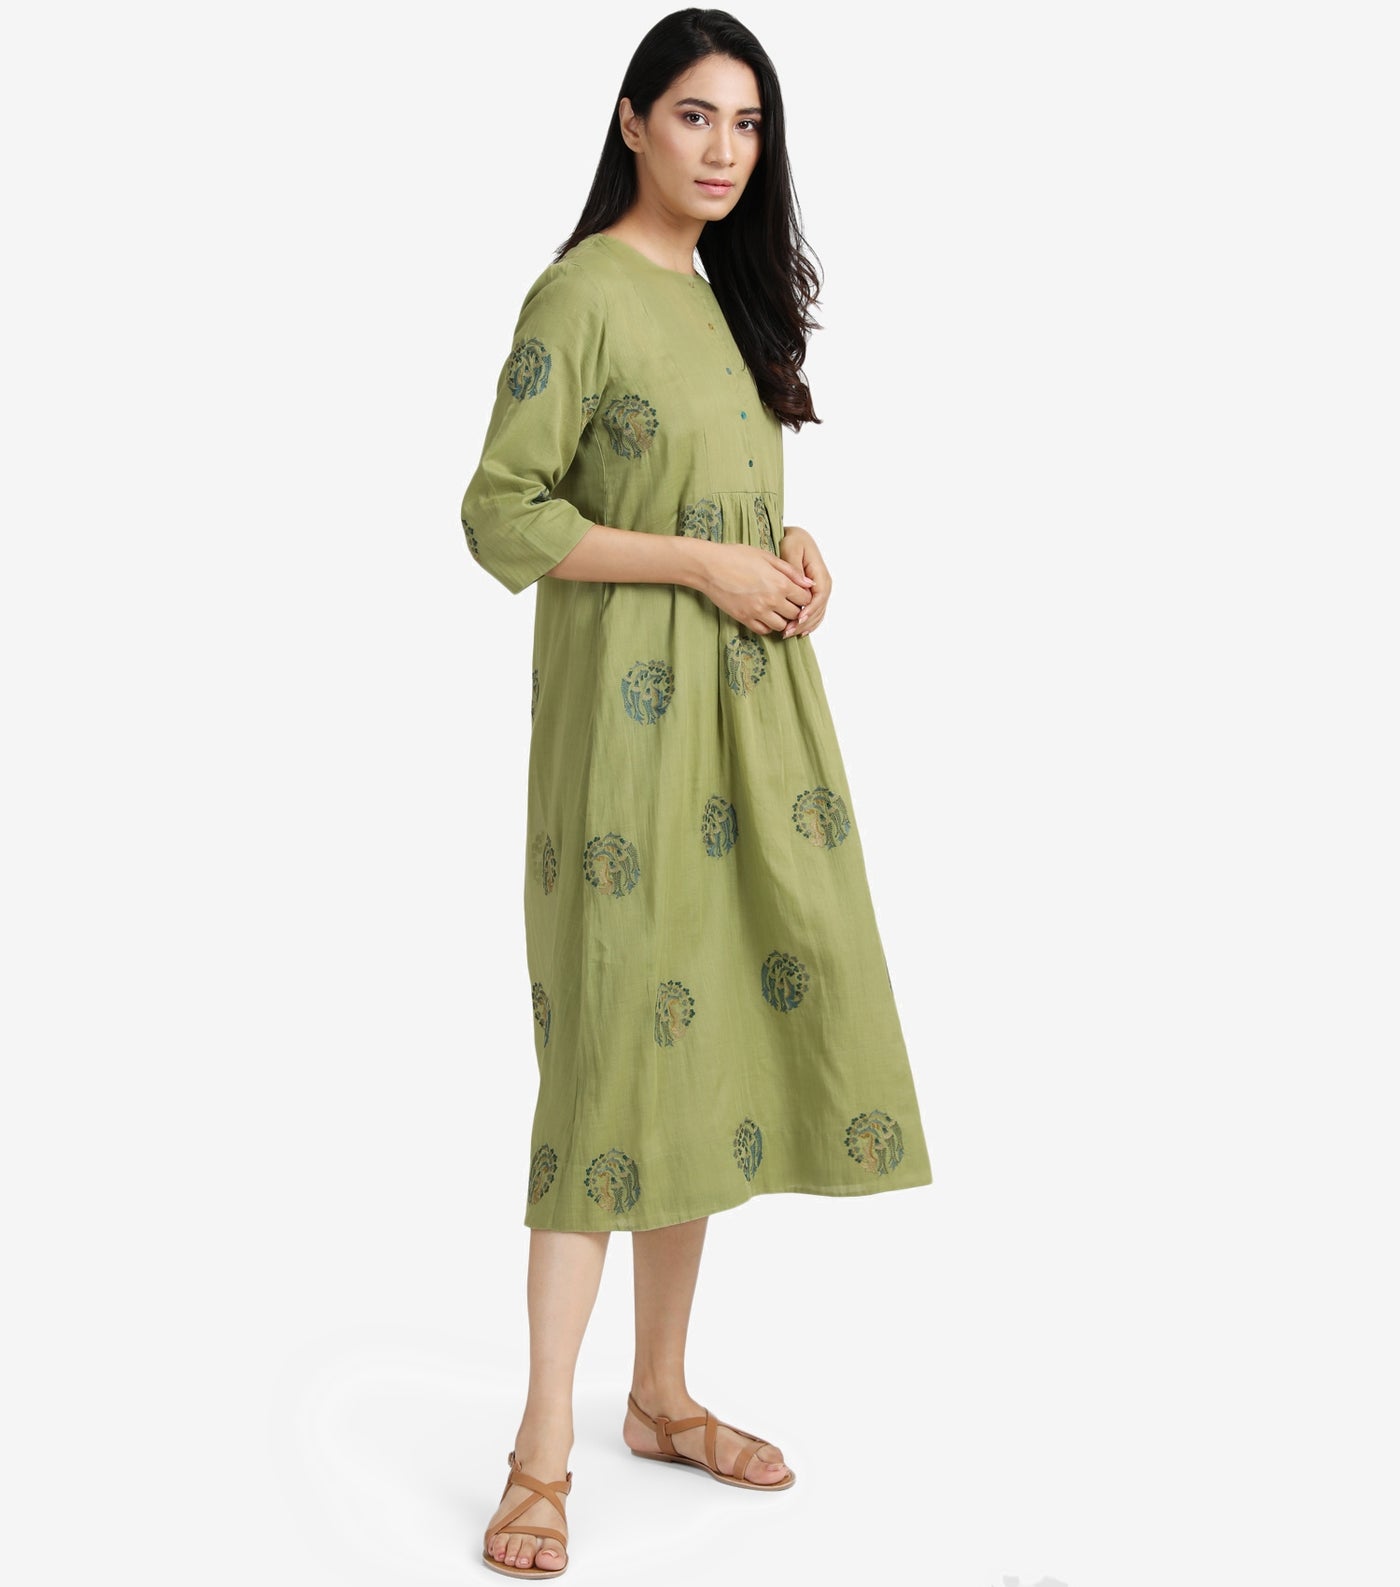 Green embroidered cotton dress